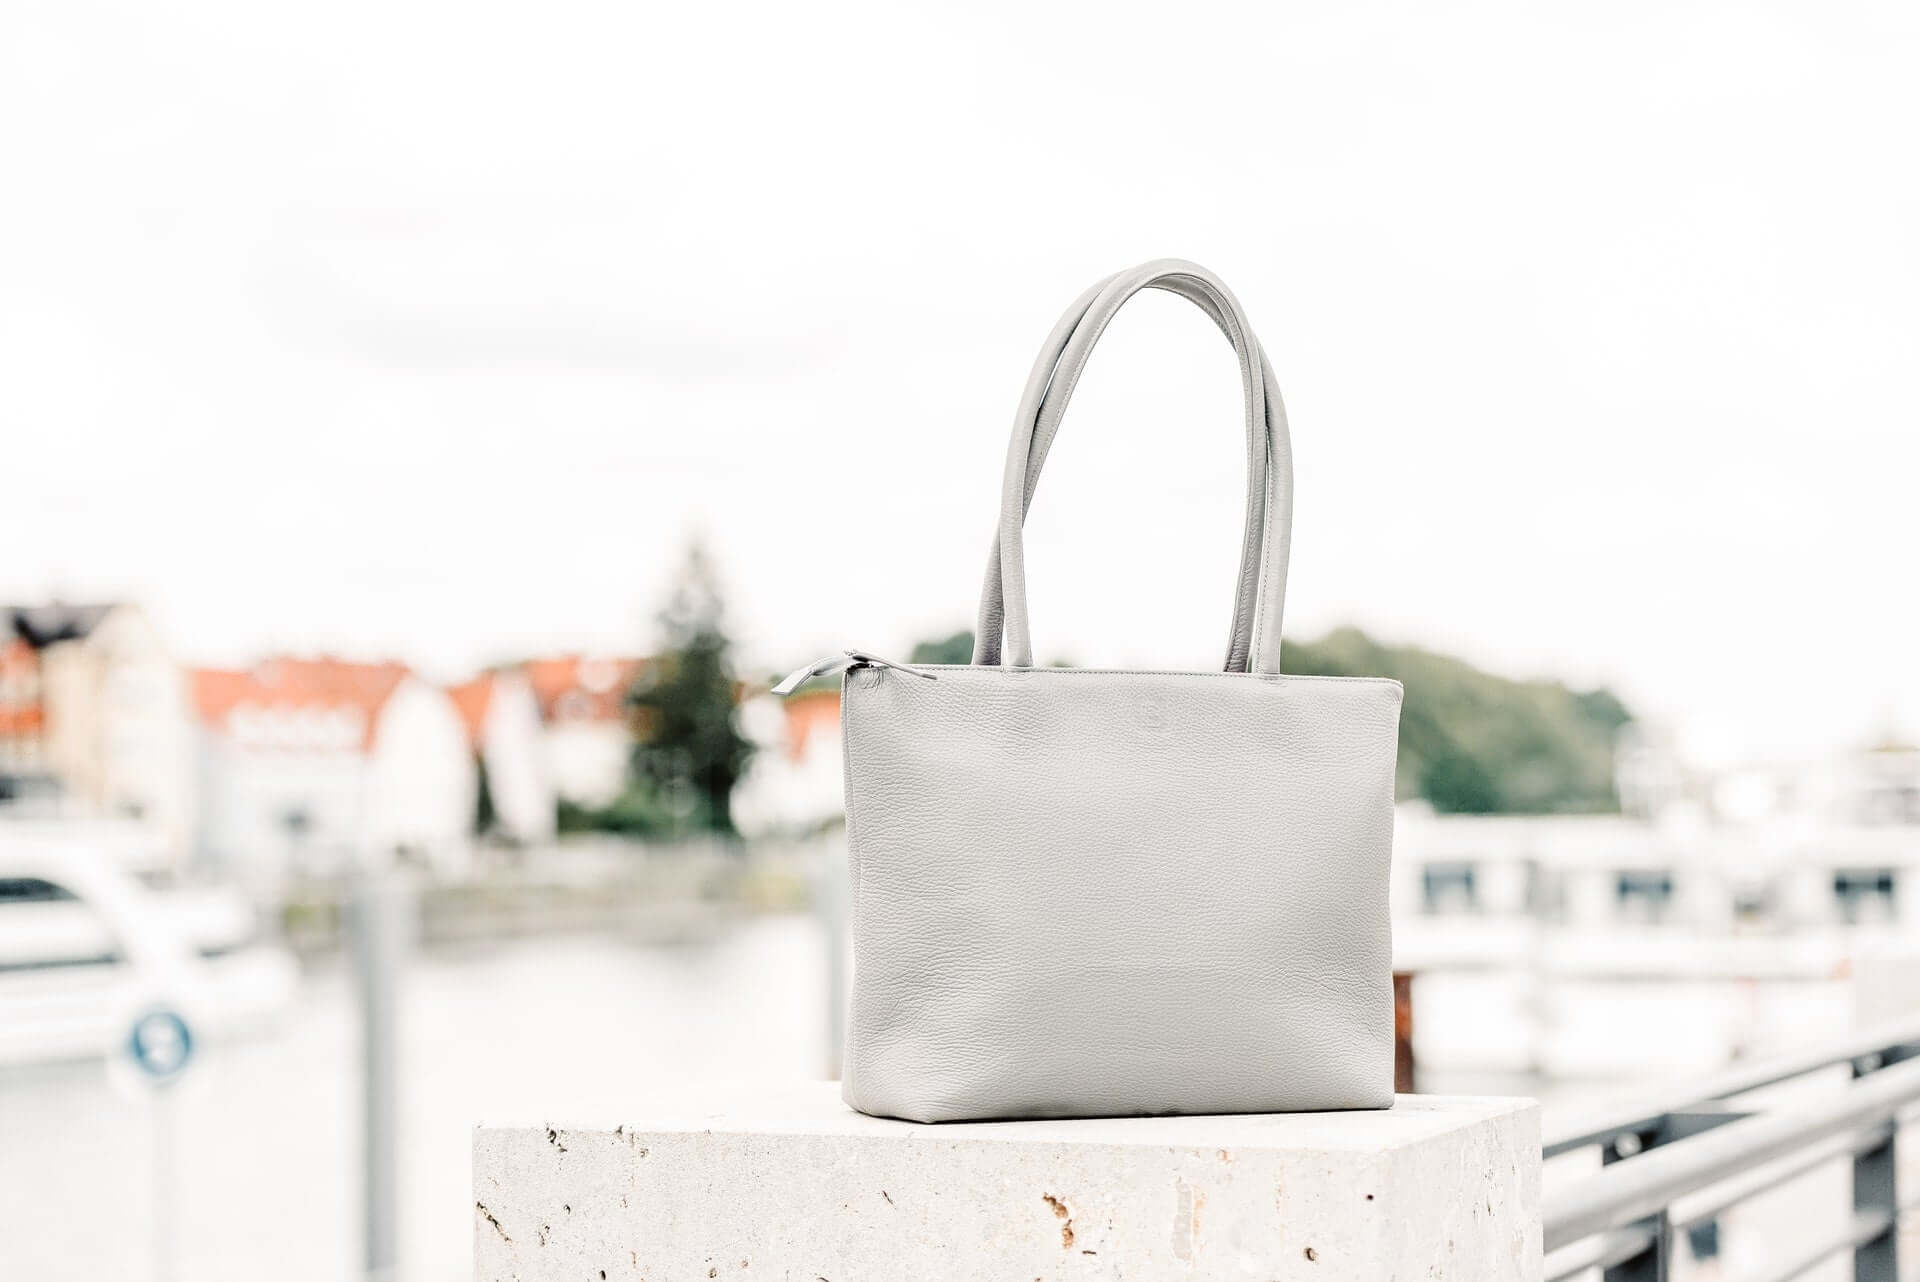 A grey tote bag propped on a wall with a suburb in the background.